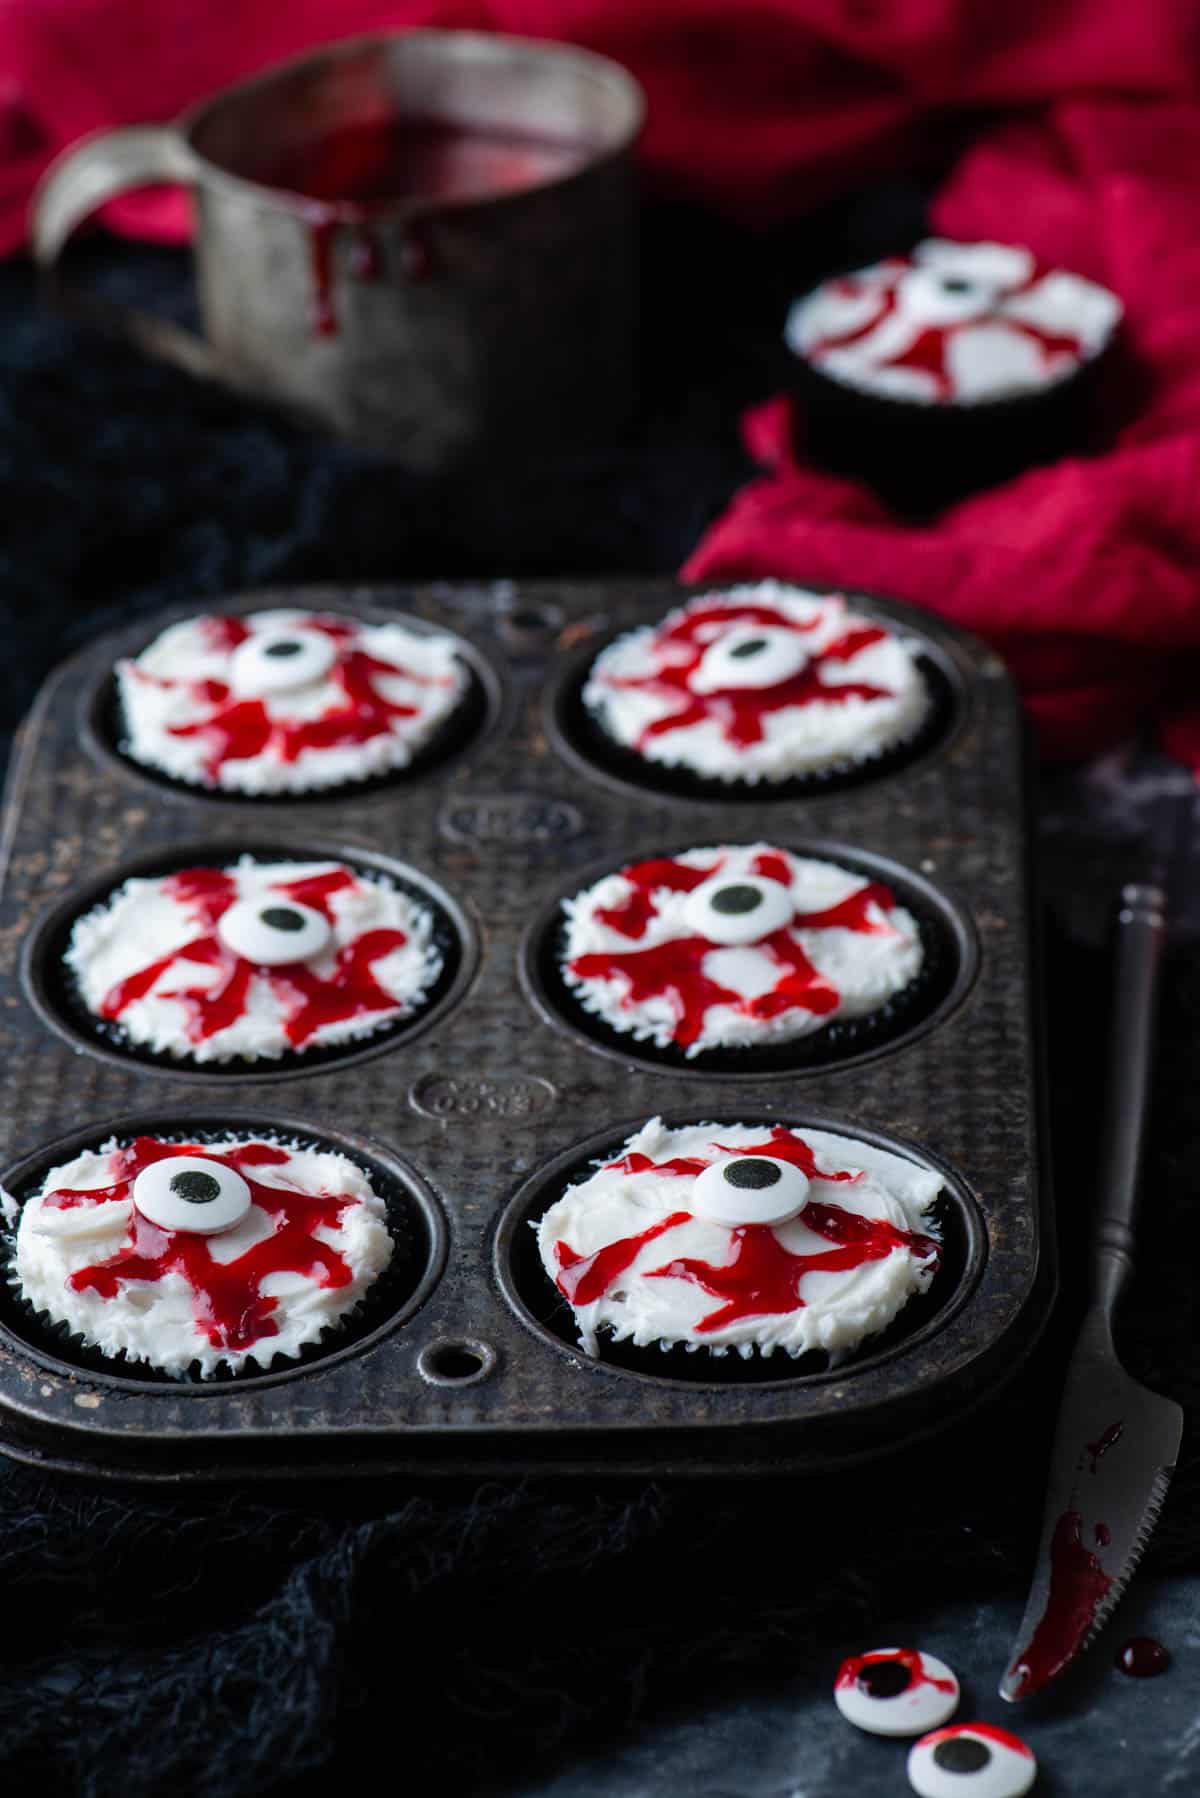 a cupcake tin full of eyeball cupcakes surrounded by a knife, candy eyeballs, bloody jam and a red towel